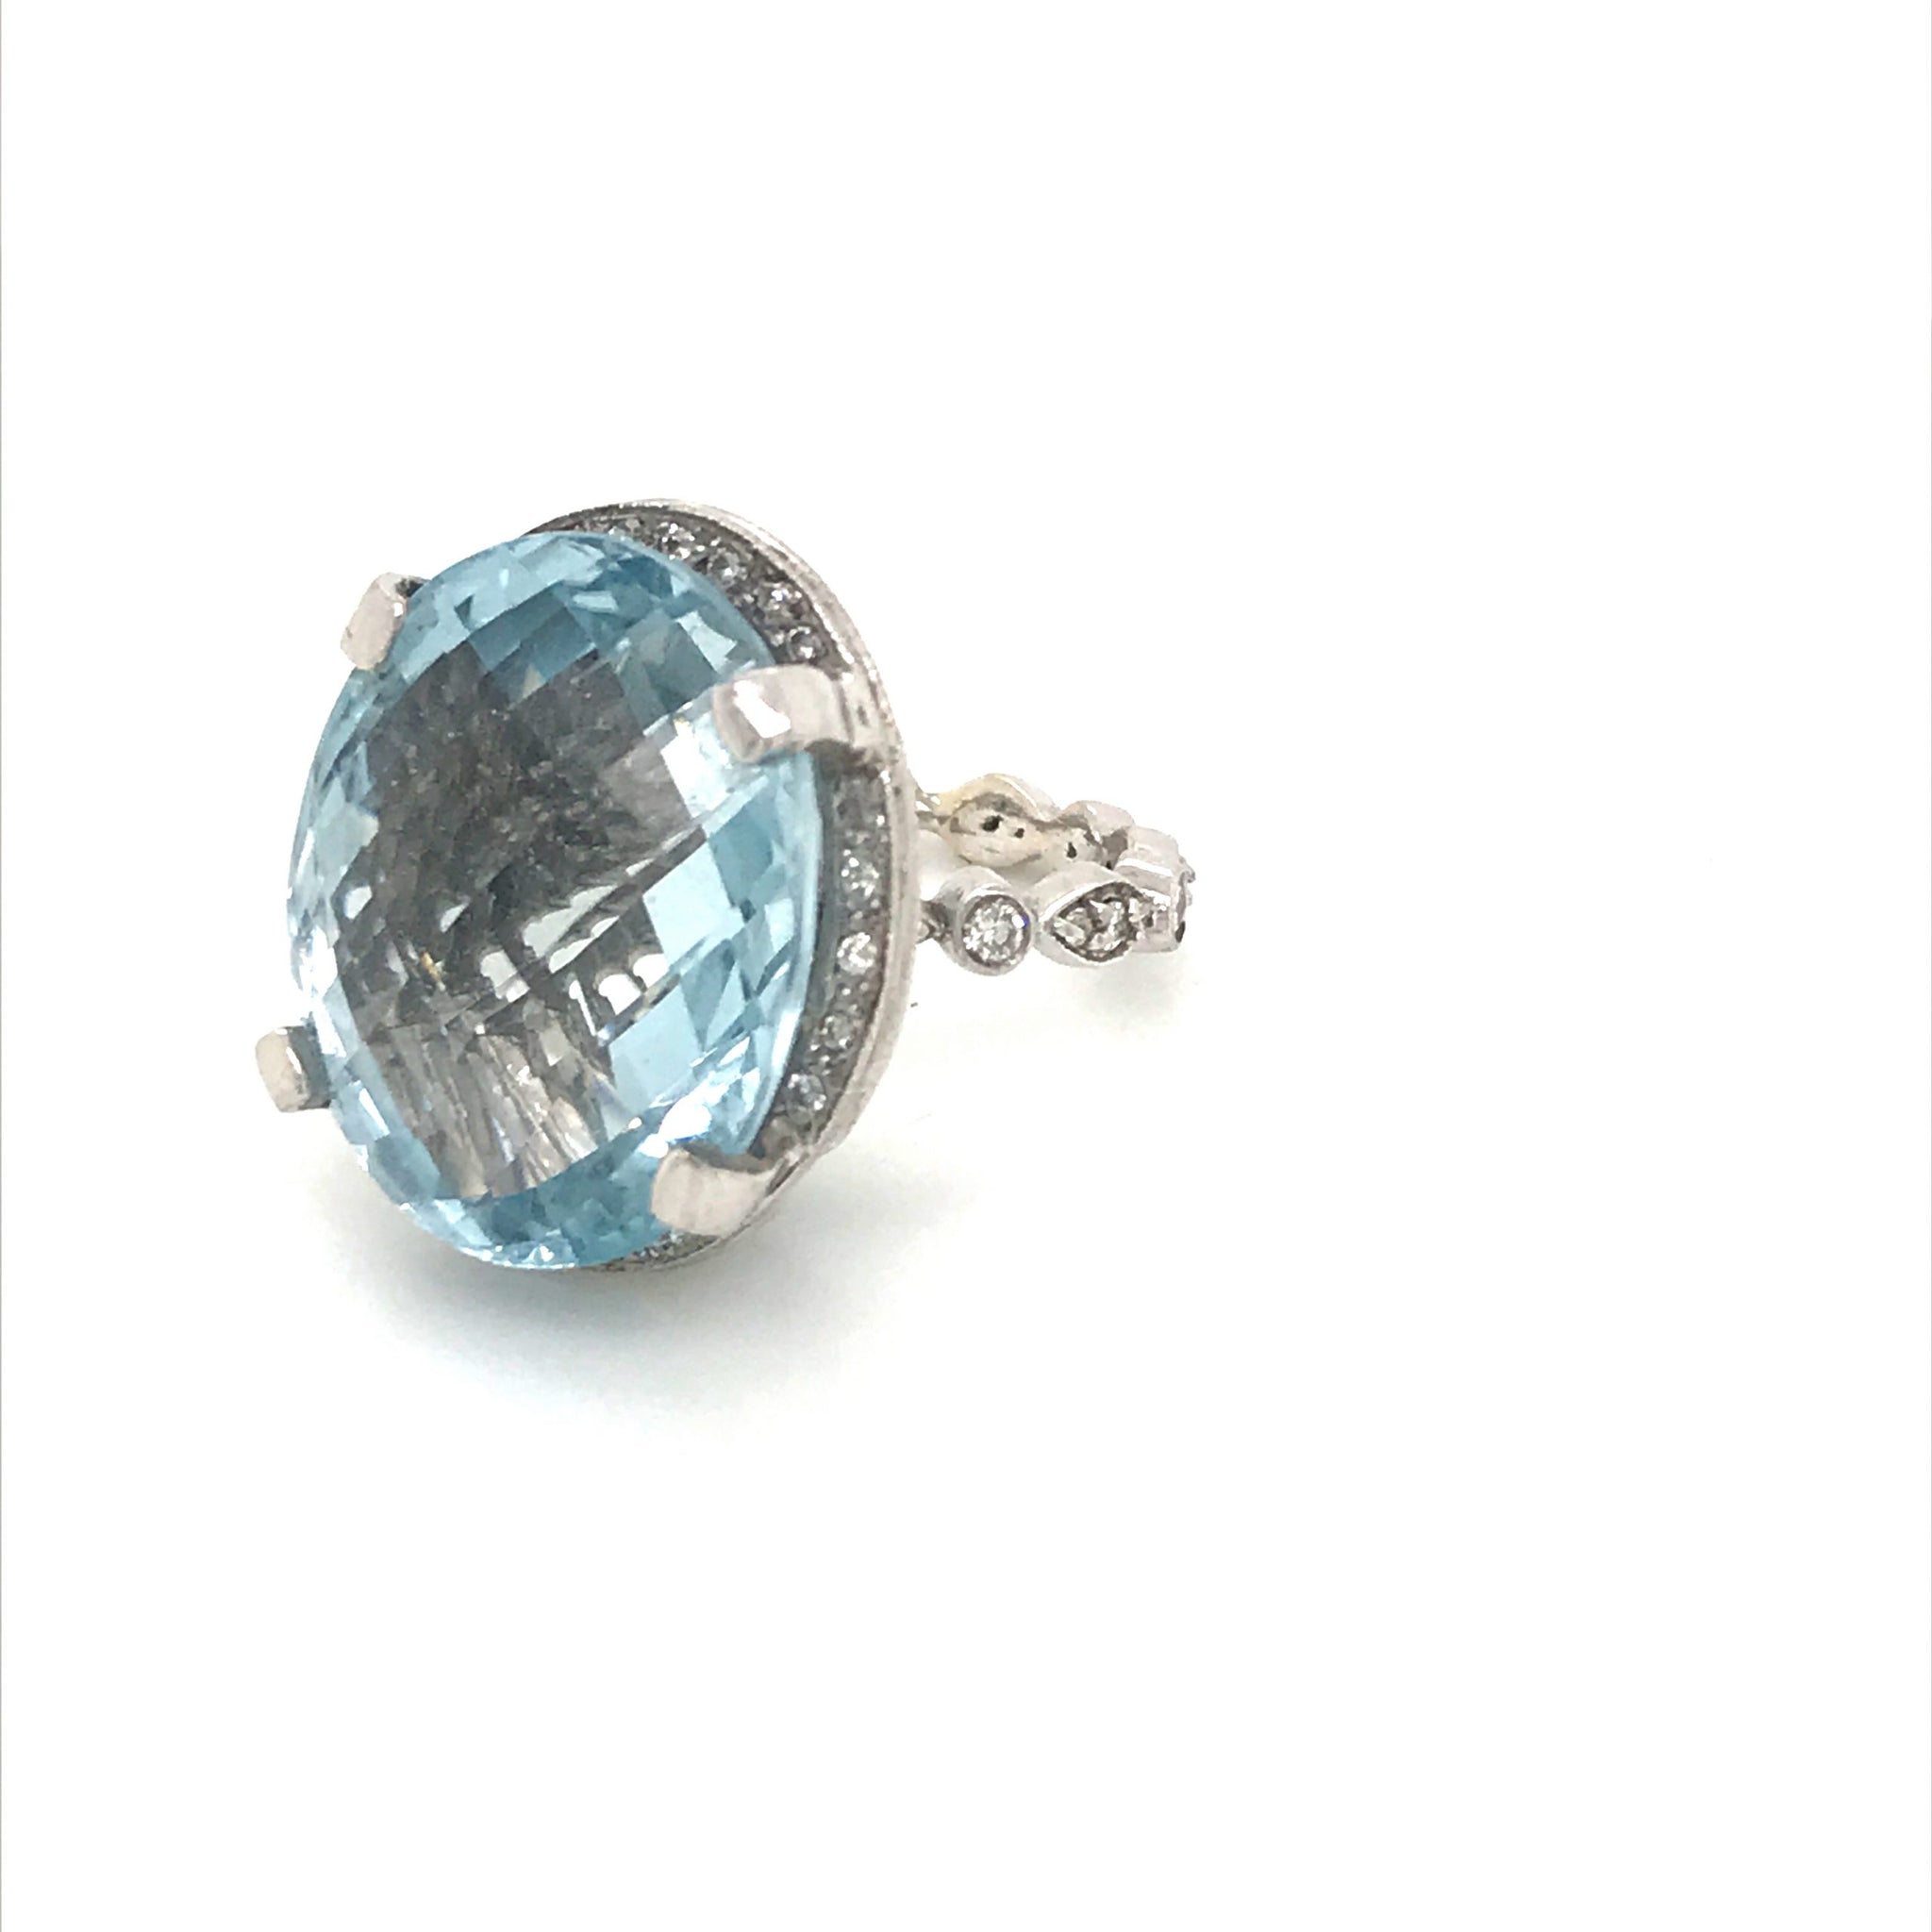 'The Rebecca' Blue Topaz Cocktail Ring